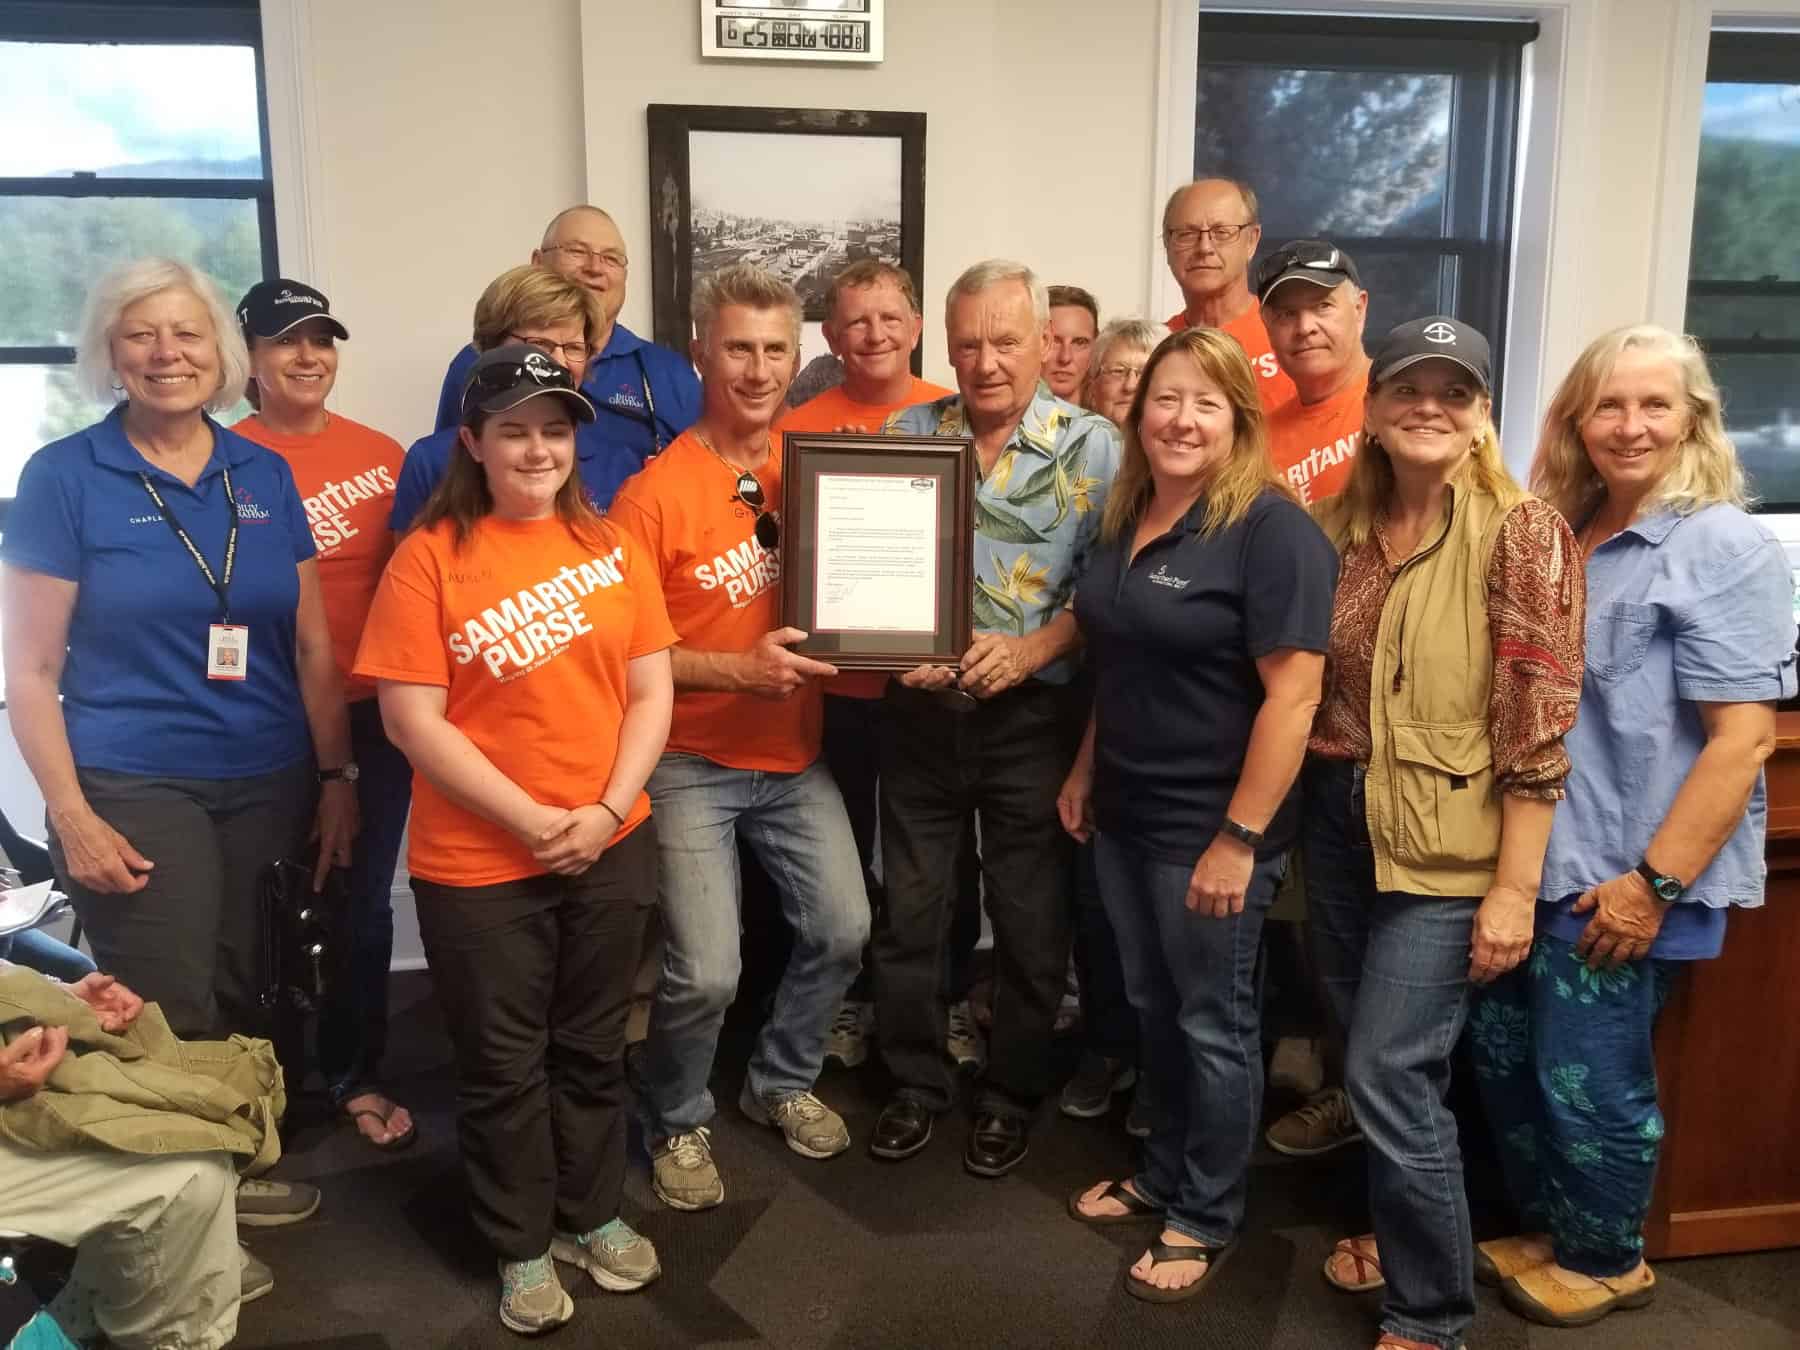 Samaritan's Purse was recognized by the mayor of Grand Forks, Frank Konrad, for their clean up and recovery efforts during the spring flood.